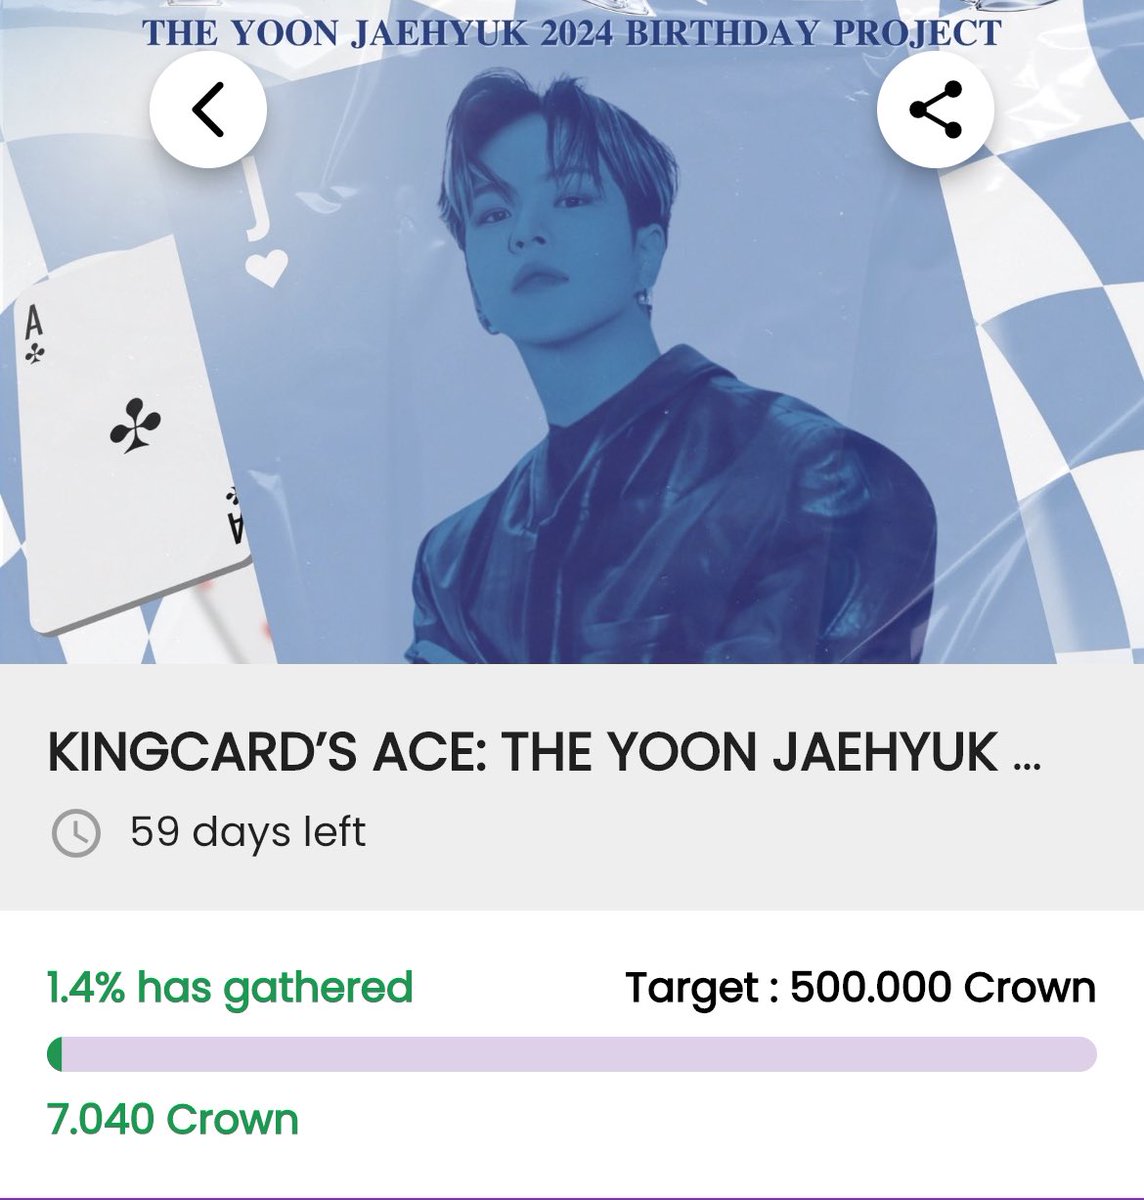 [🗳️] QUEERI FAN SUPPORT 🎯 7.040/500000 crowns 59 DAYS LEFT! You may watch ads and convert it to gold crowns or donate any amount to our @YJFSFunds! Let’s reach our goals for Jaehyuk. ALL IN FOR JAEHYUK #YOONJAEHYUK #윤재혁 #ユンジェヒョク @treasuremembers